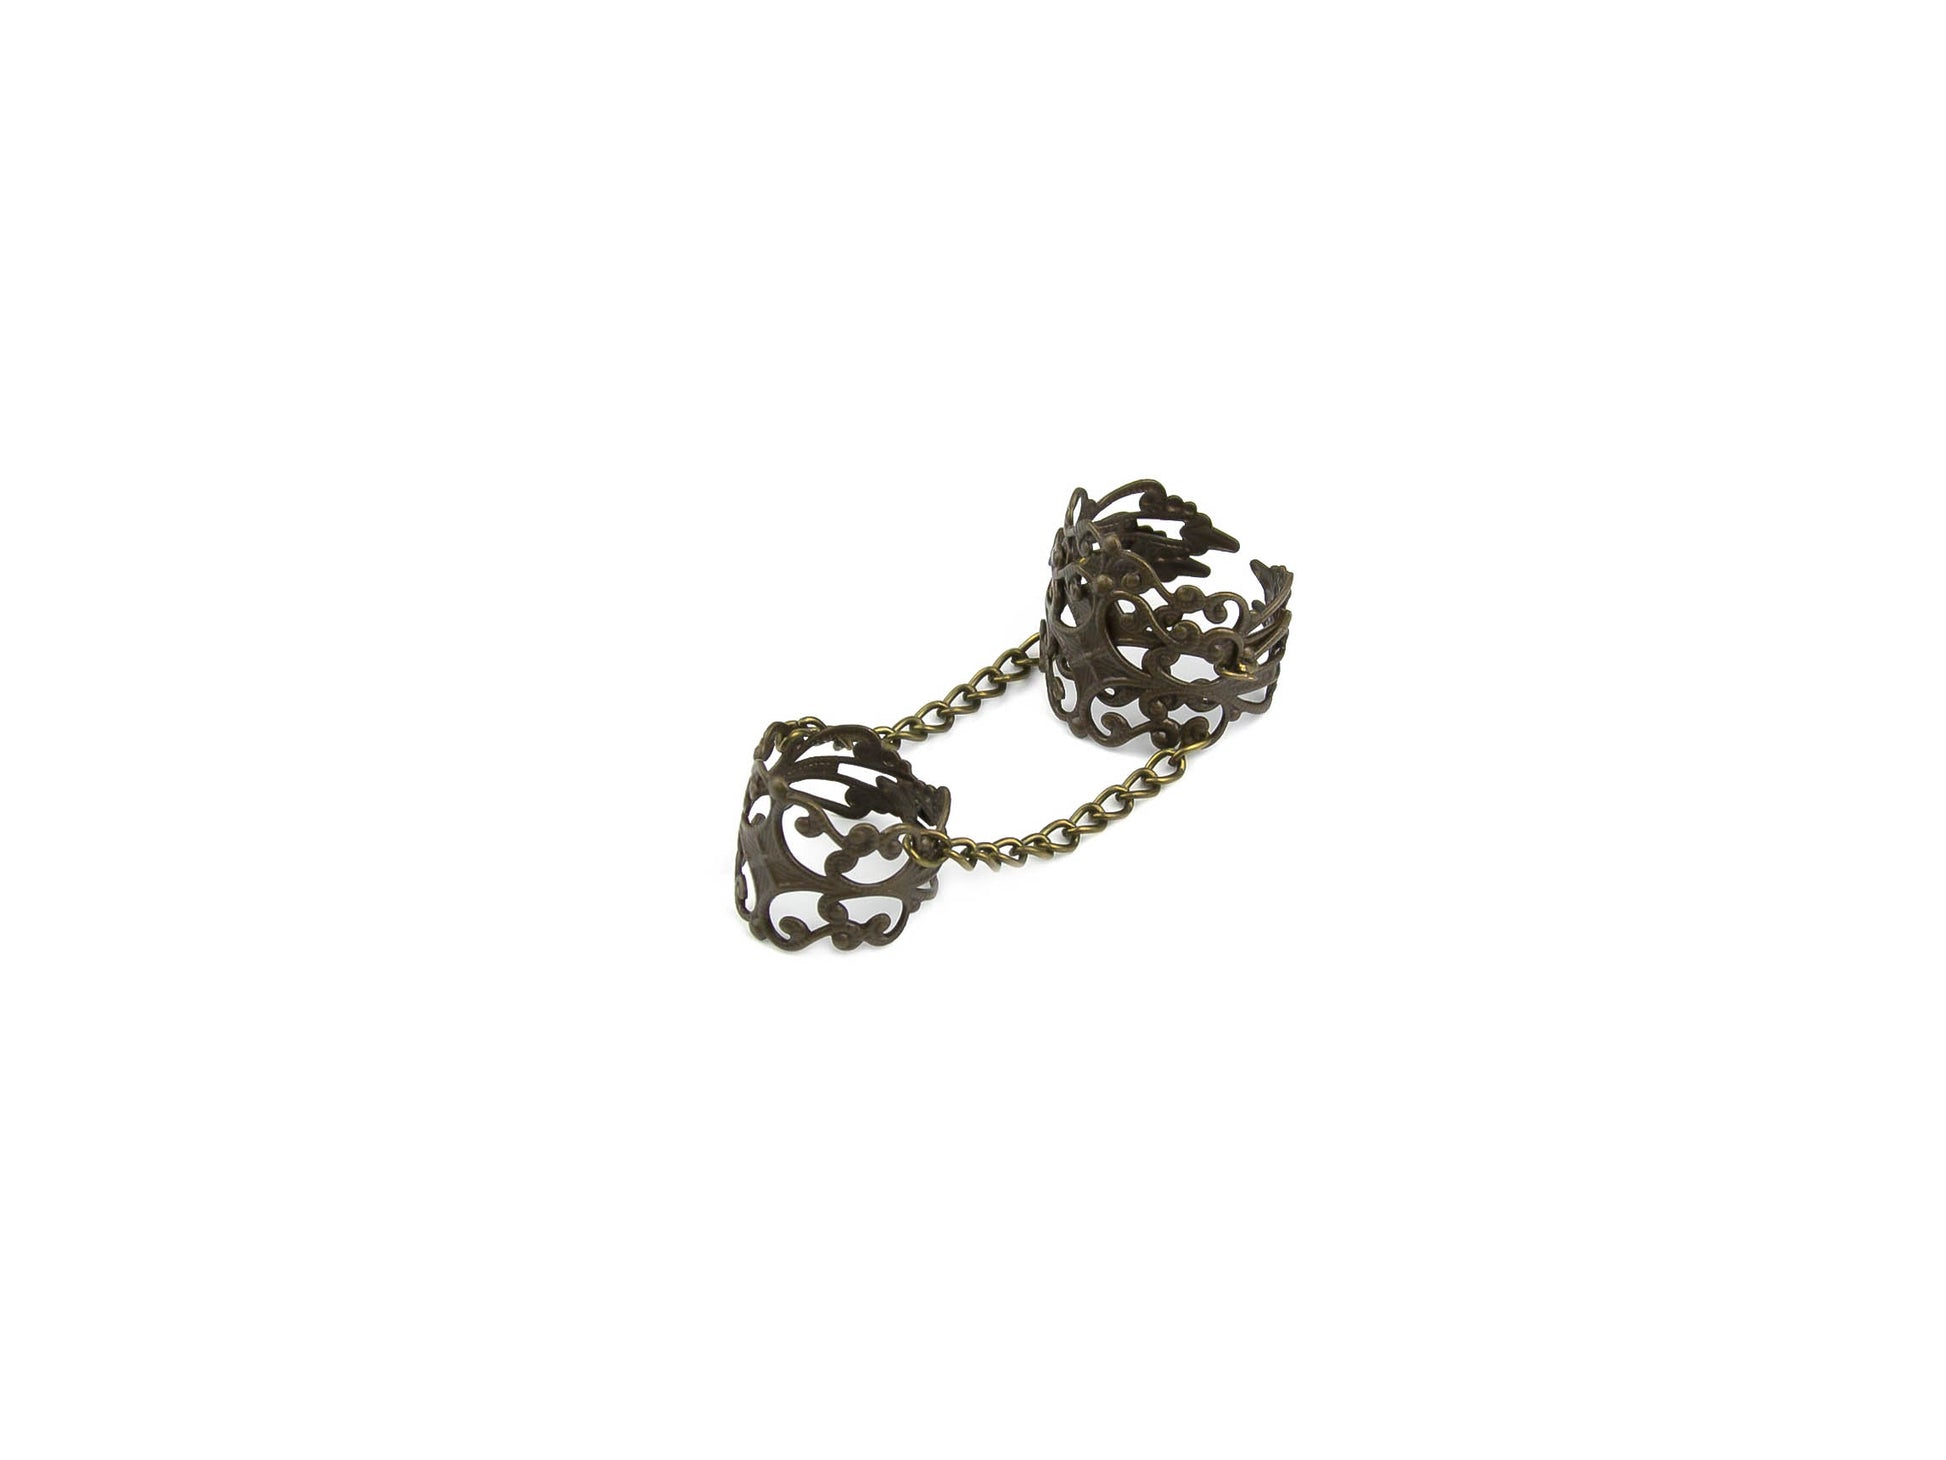 Intricately designed Myril Jewels bronze double ring, connecting two bands with a delicate chain. A statement piece that embodies neo-gothic charm, perfect for Halloween, everyday wear, or as a standout accessory for rave parties. A thoughtful goth girlfriend gift that captures the essence of whimsigoth and bold jewelry.